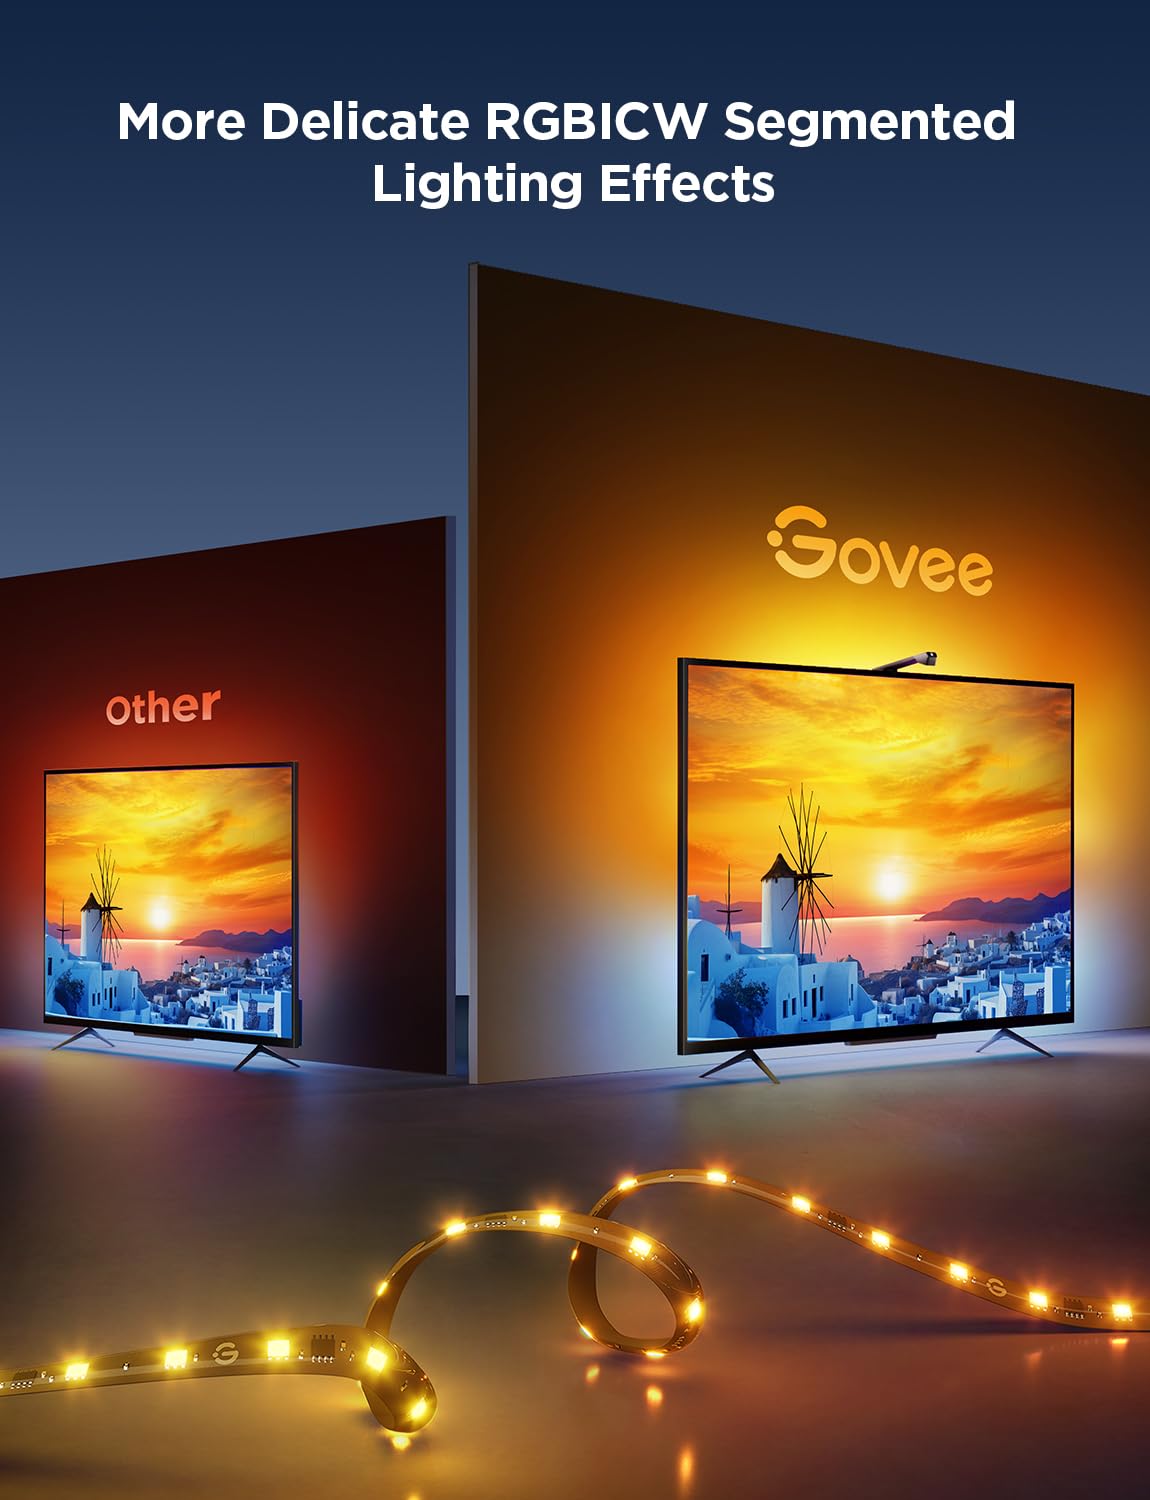 Govee TV Backlight 3 Lite with Fish-Eye Correction Function Sync to 75-85 Inch TVs, 16.4ft RGBICW Wi-Fi TV LED Backlight with Camera, 4 Colors in 1 Lamp Bead, Voice and APP Control, Adapter